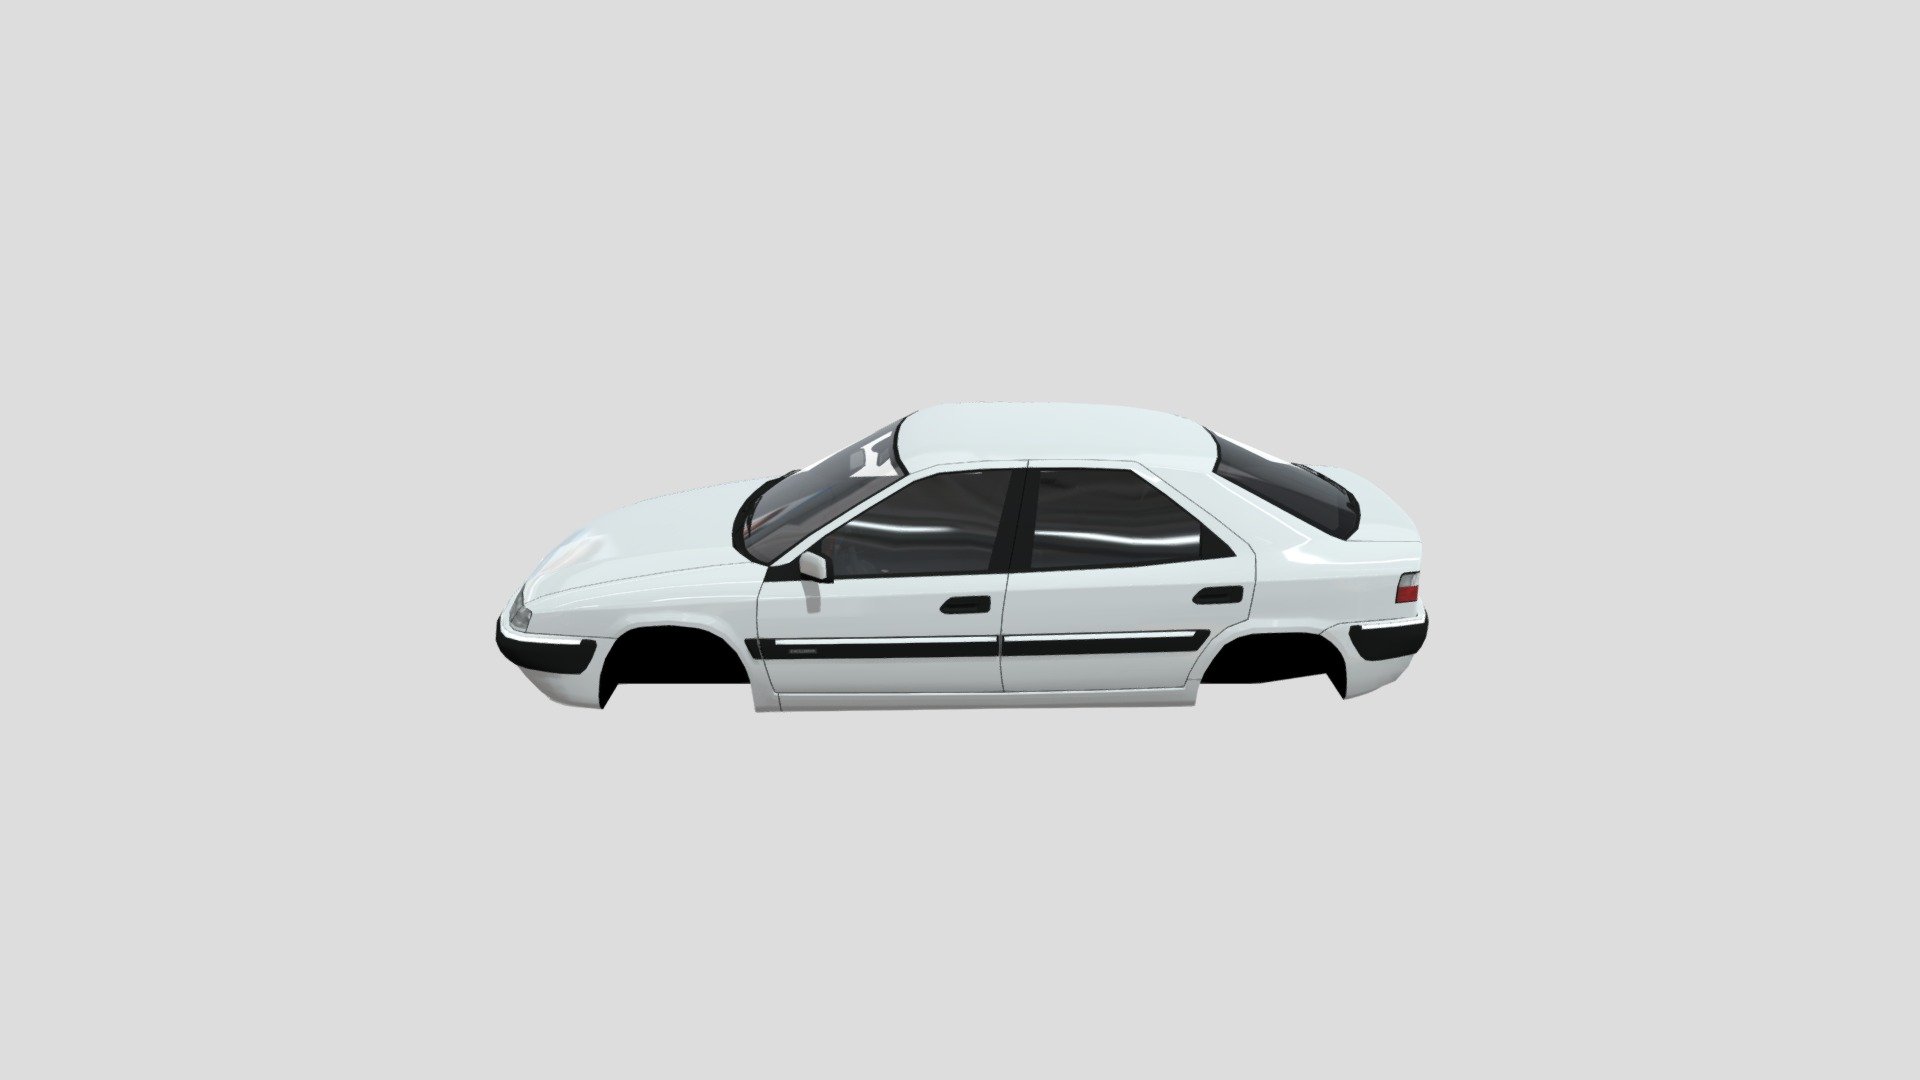 Citroen Xantia
(low poly)
Suitable for making Android games - Citroen Xantia (low poly) - 3D model by iran modeling (@mmd.3.1387h) 3d model